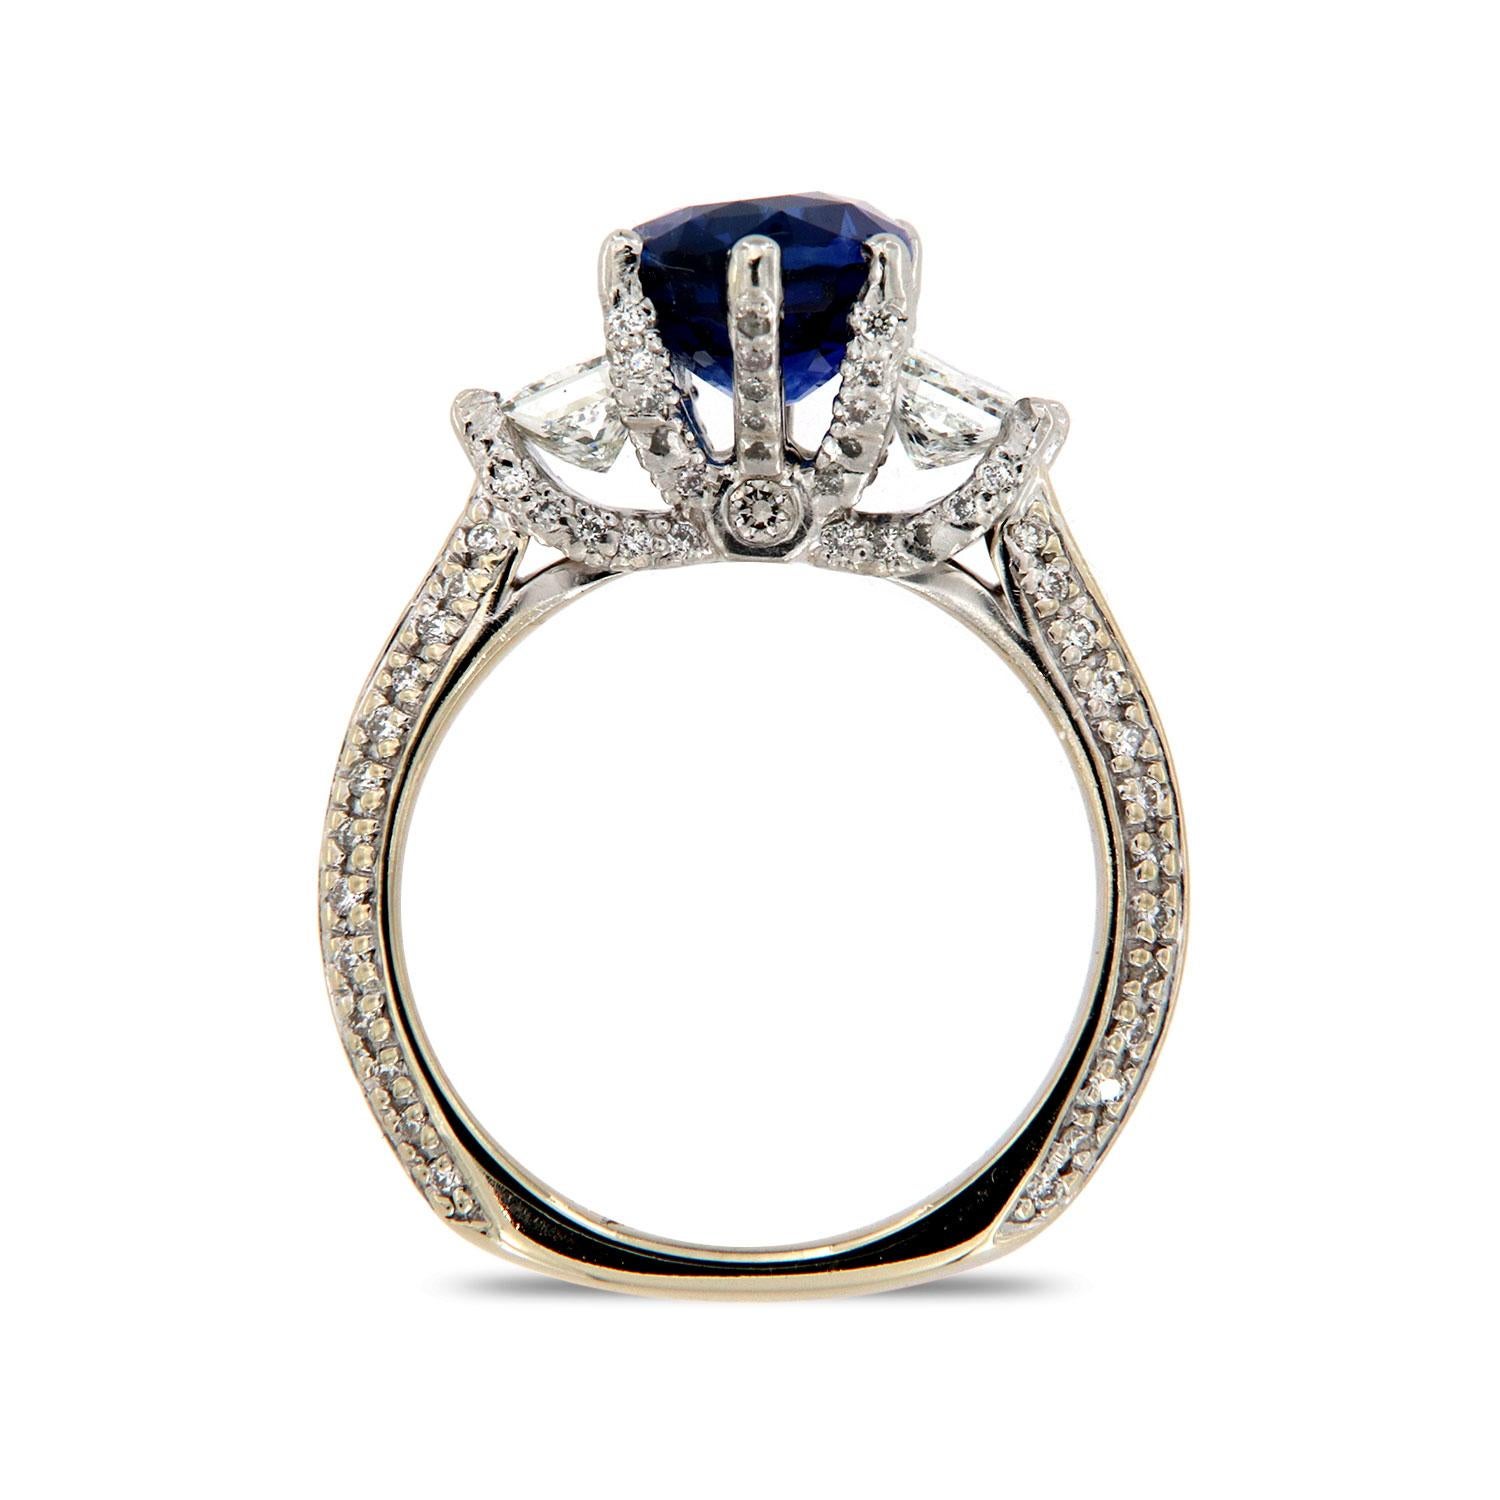 18K White Gold and Platinum Oval Sapphire Diamond Ring GIA 'Center, 3.53 Carat' In Excellent Condition For Sale In San Francisco, CA